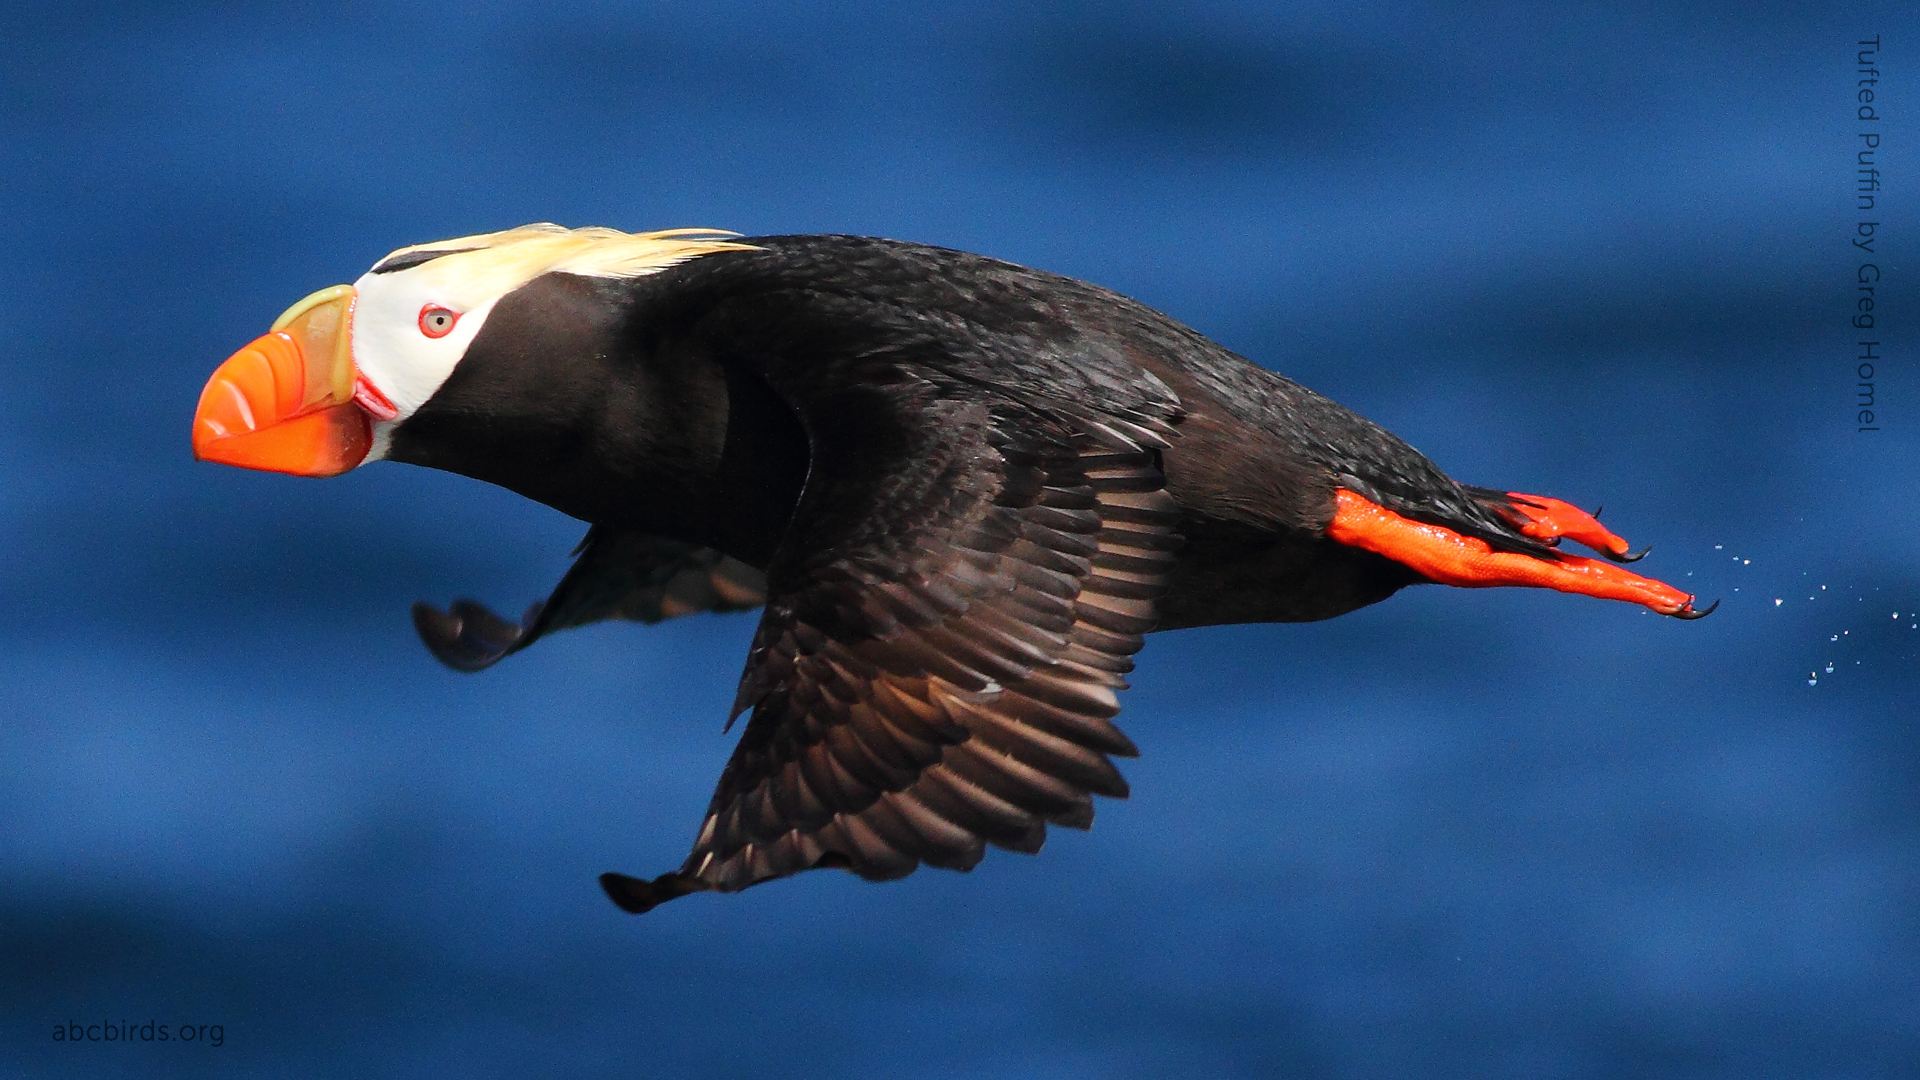 Tufted puffin photo